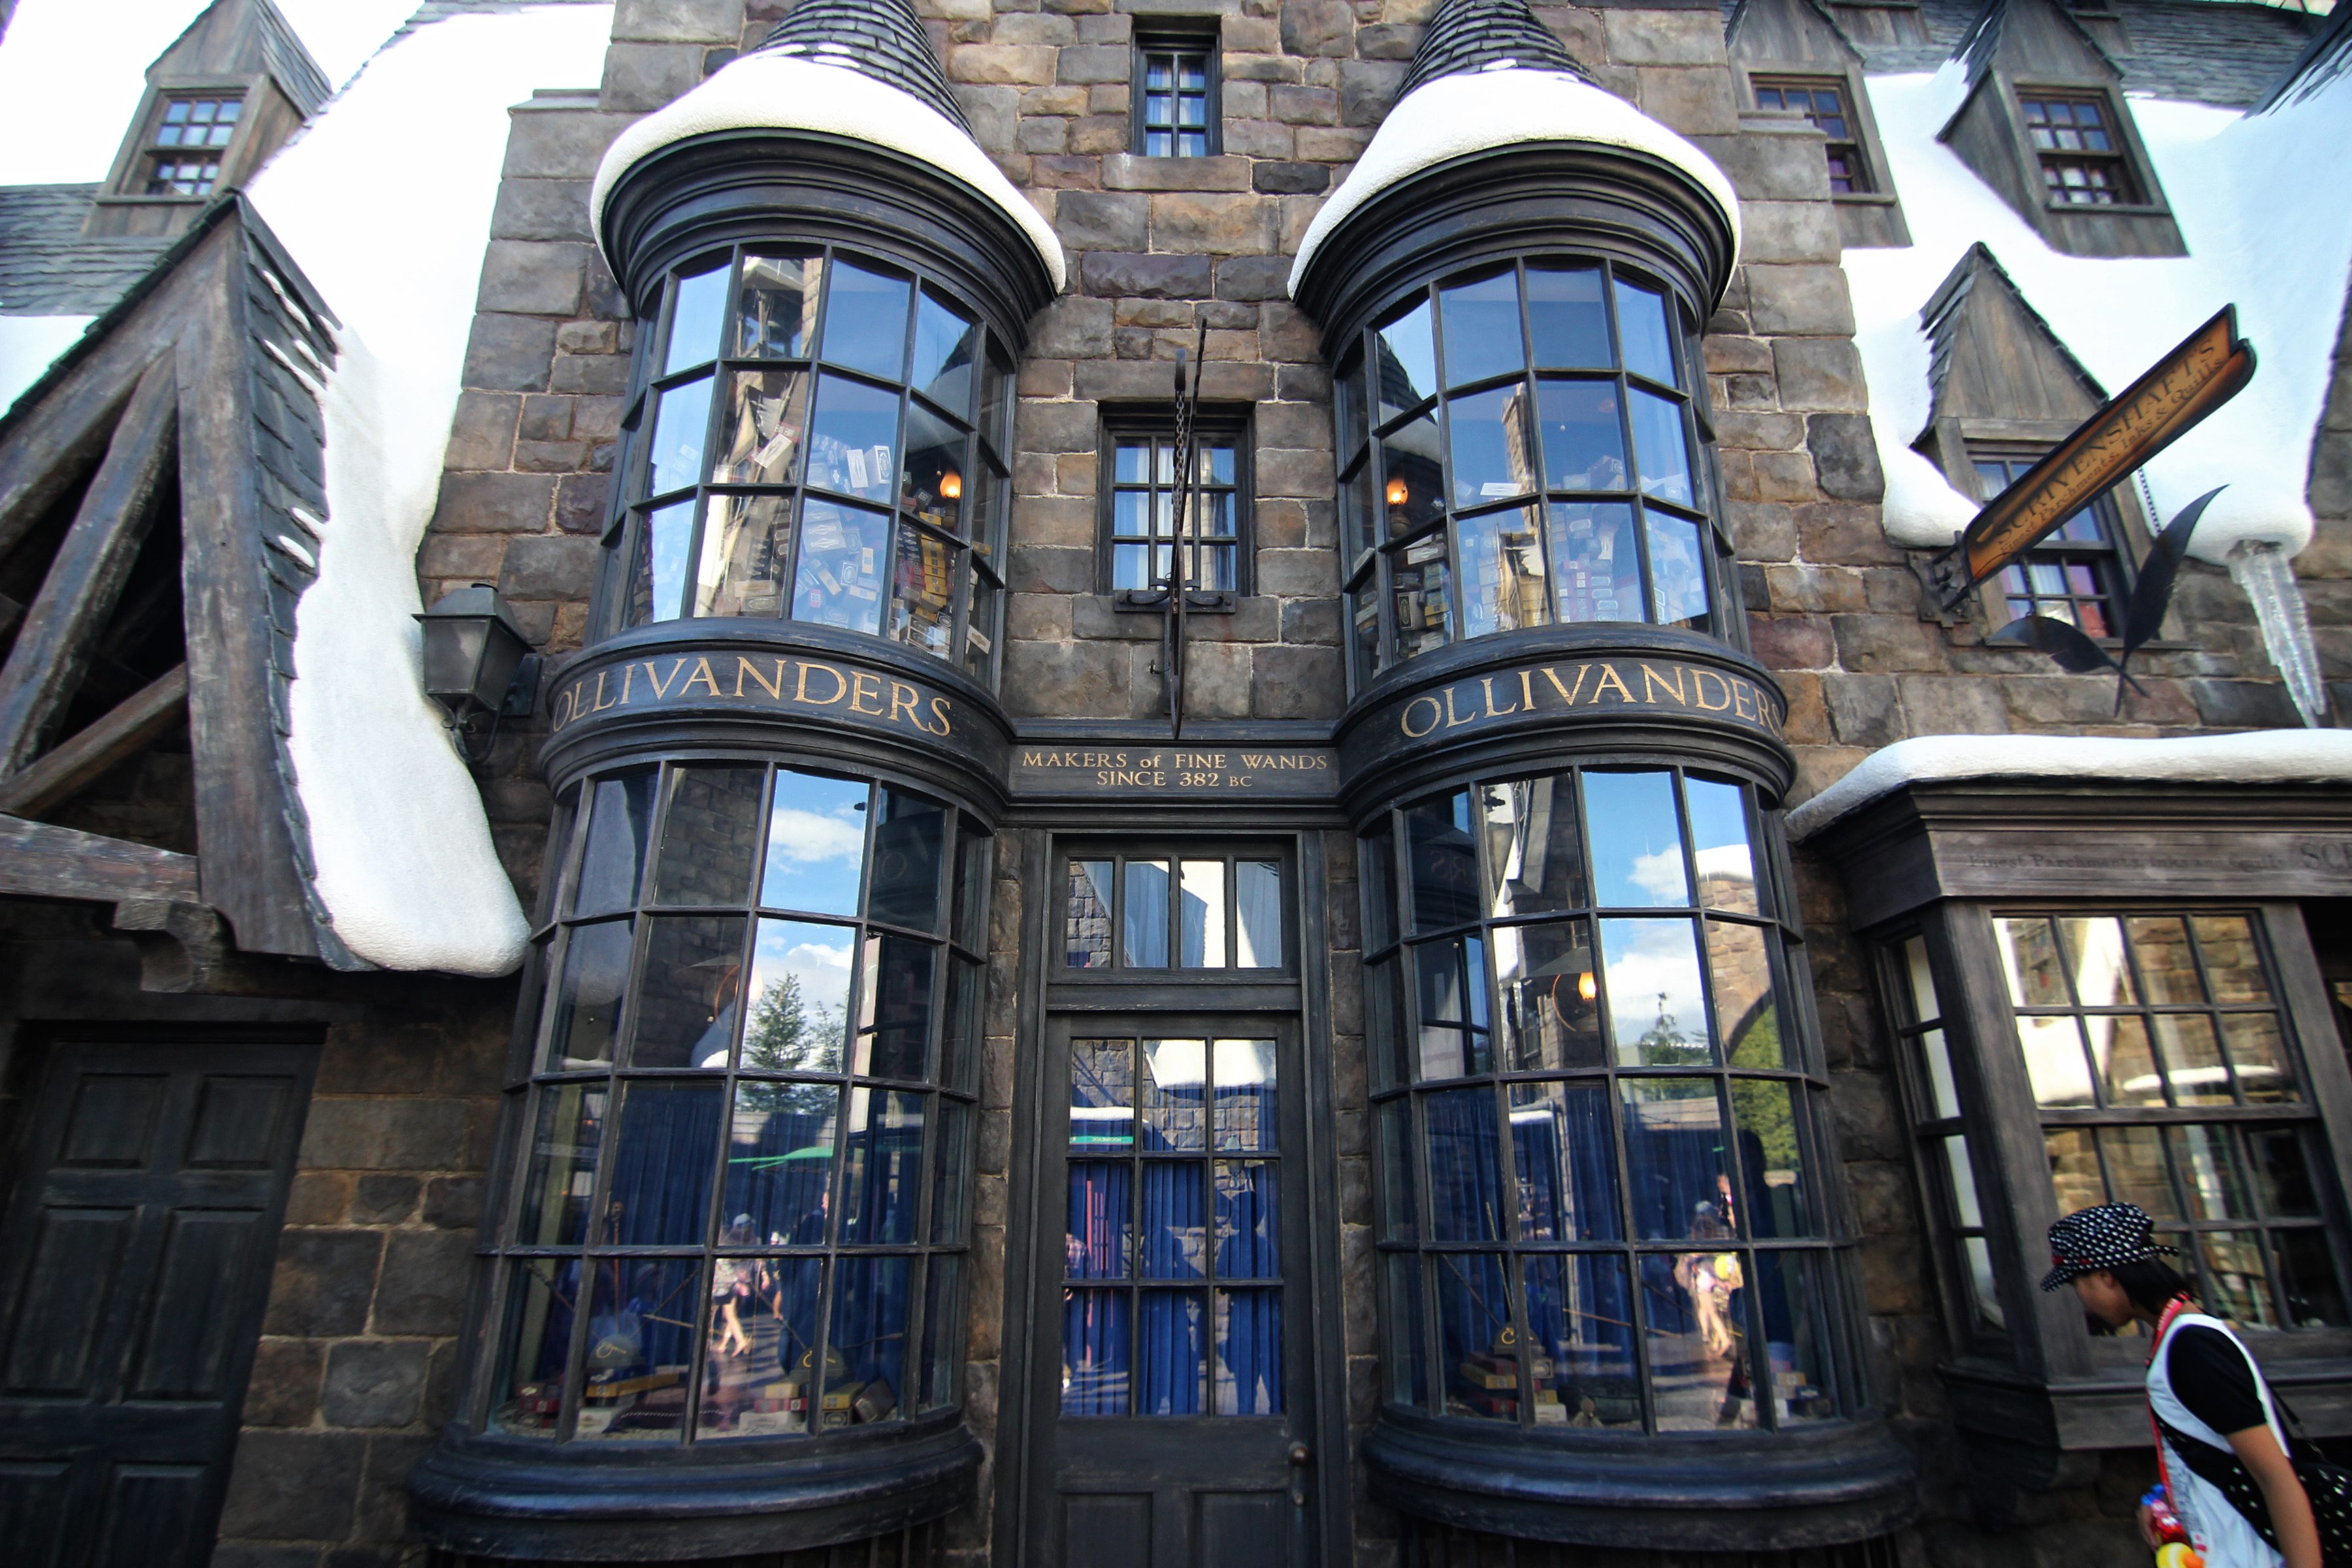 An actual Ollivander's shop can also be found along the street of Hogsmeade inside the Wizarding World of Harry Potter. Photo by Franz Lopez/Rappler 